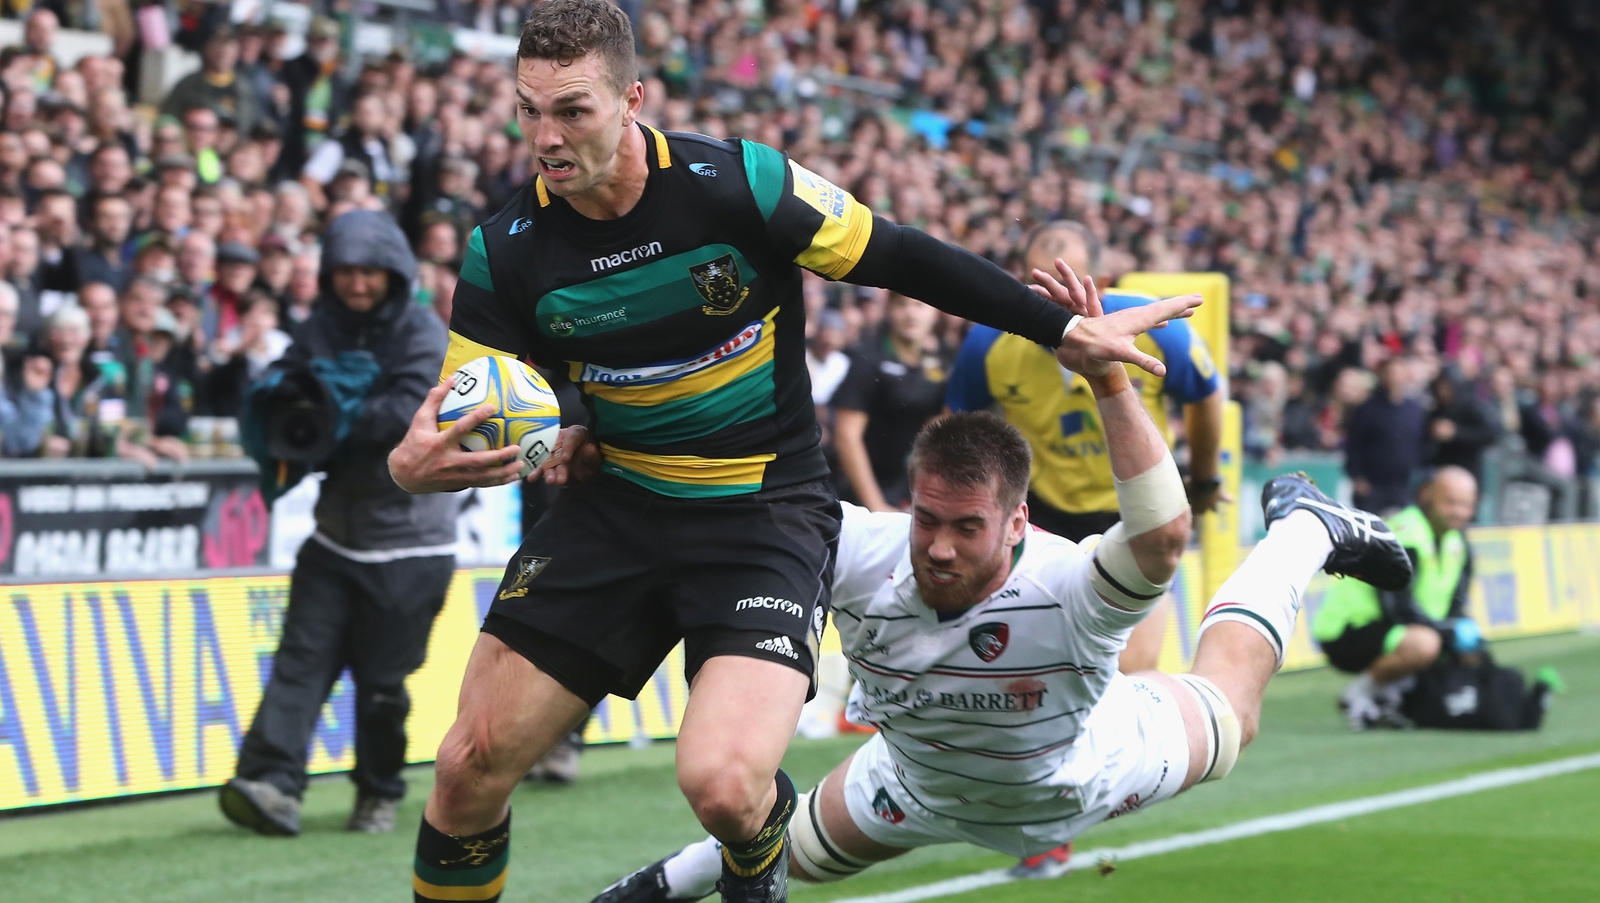 Image - Dominic Ryan is injured attempting to tackle George North last year